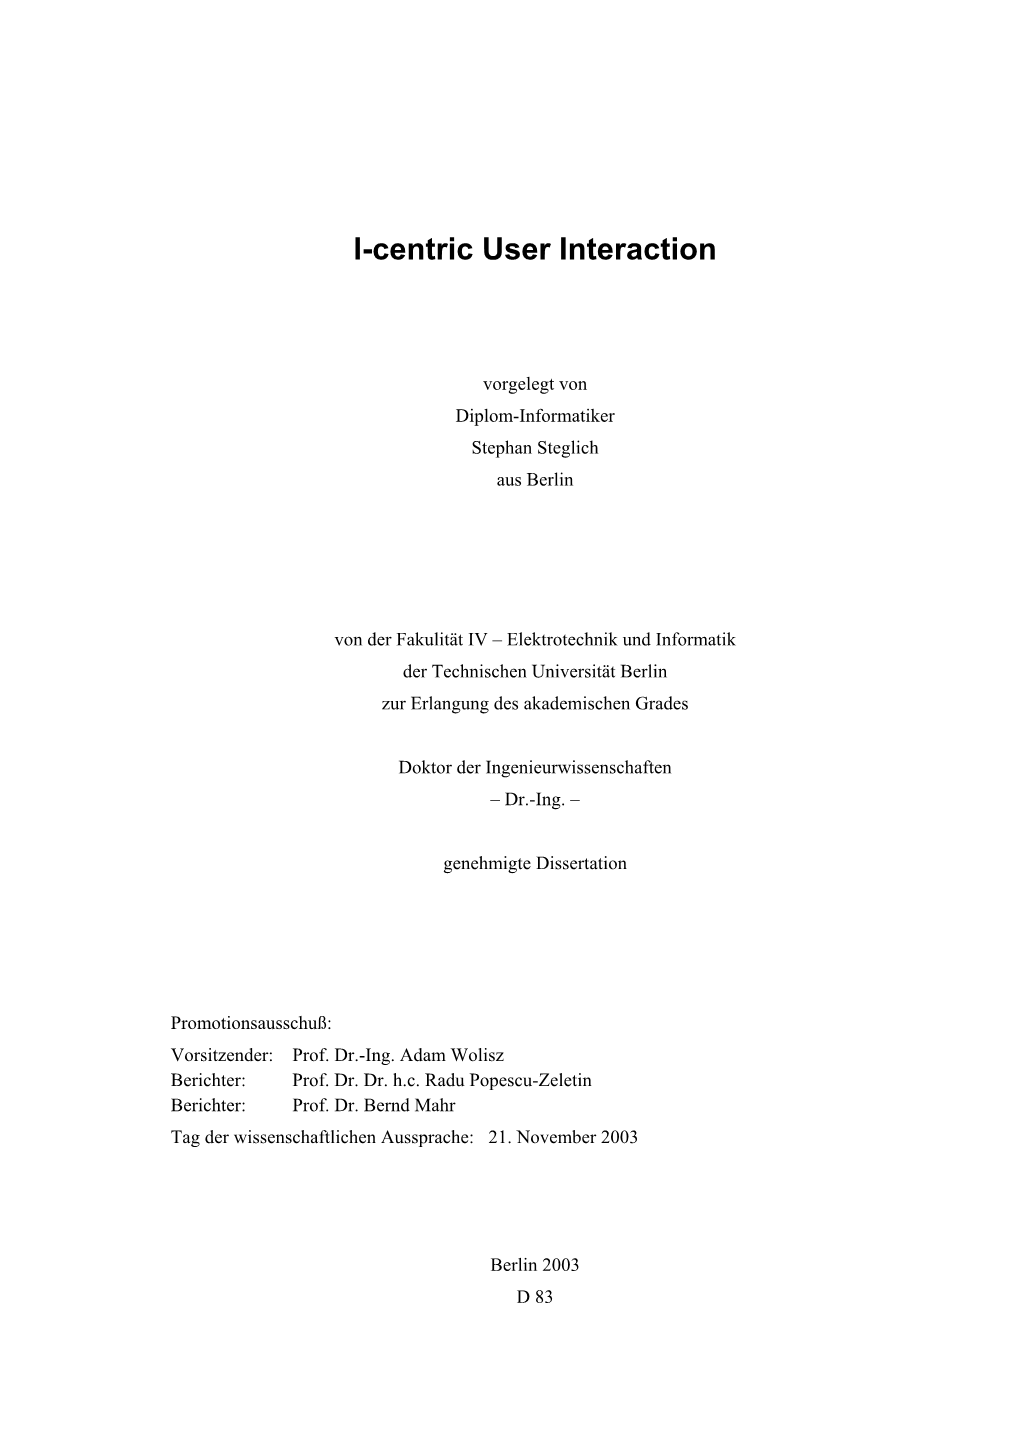 I-Centric User Interaction